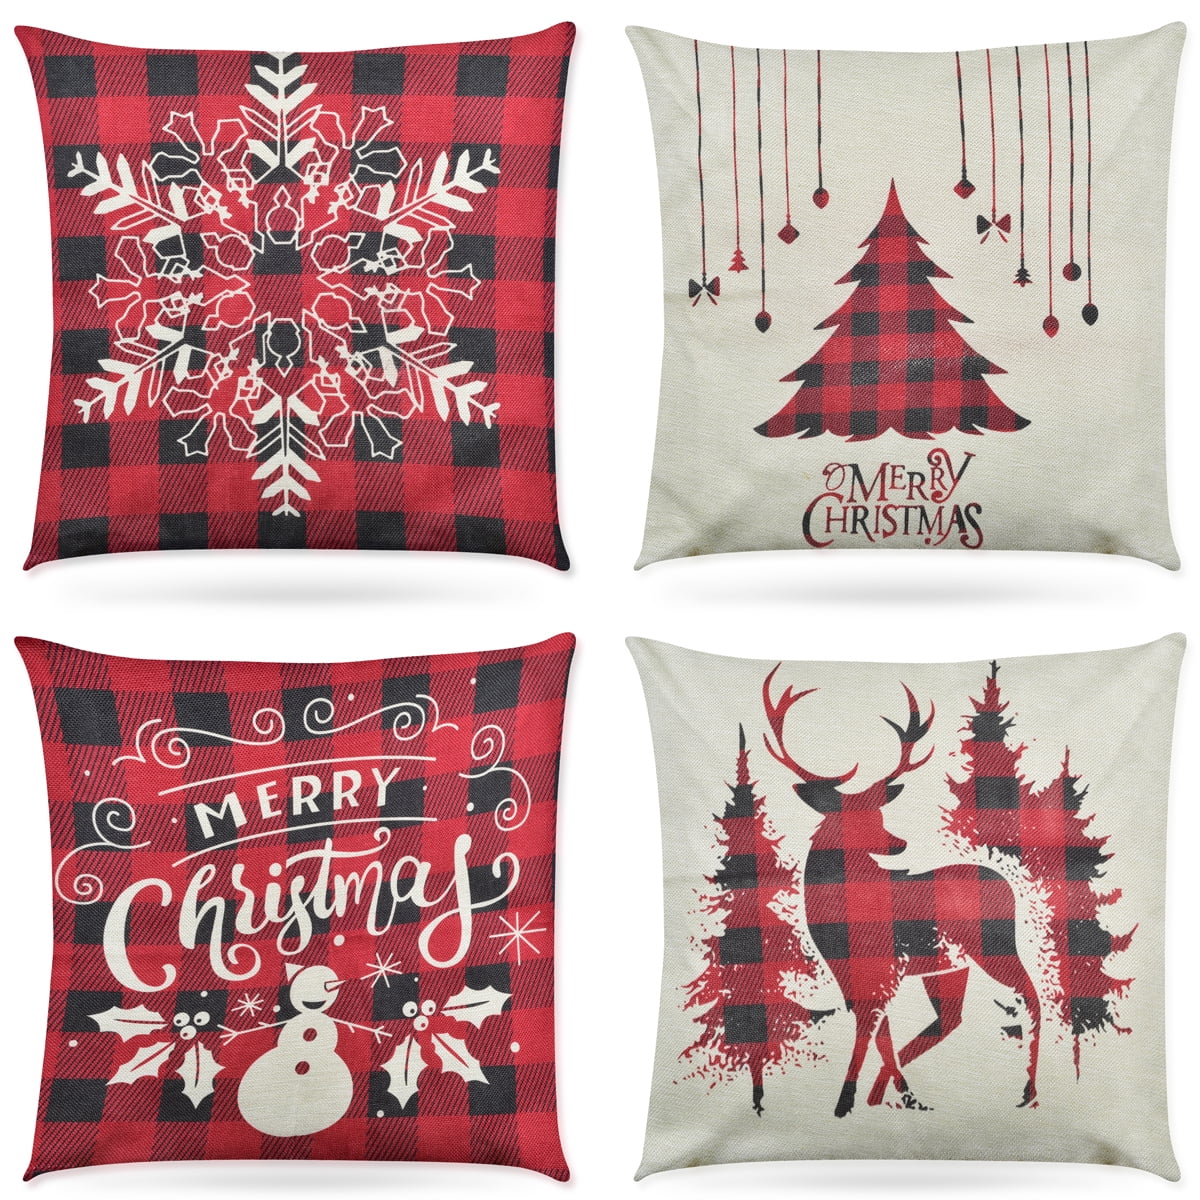 New Merry Christmas Snowflake Deer Plaid Pattern Cushion Cover Pillow Case Lates 